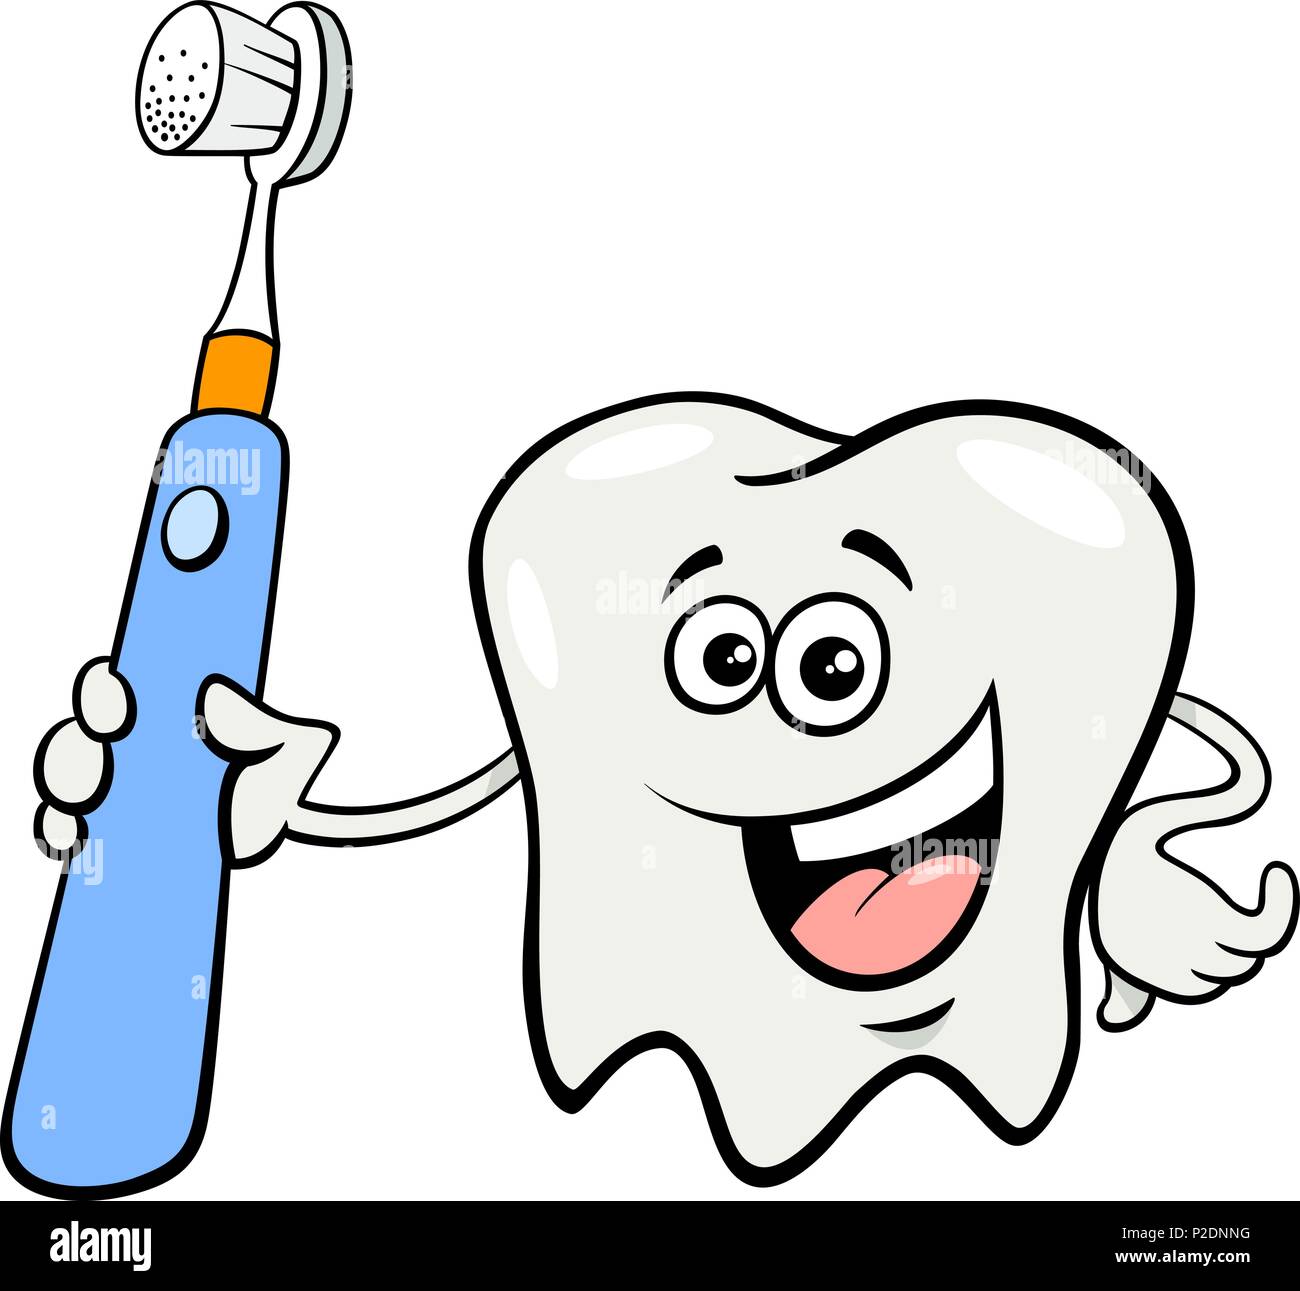 Cartoon Illustration of Happy Tooth Character with Electric Toothbrush Stock Vector